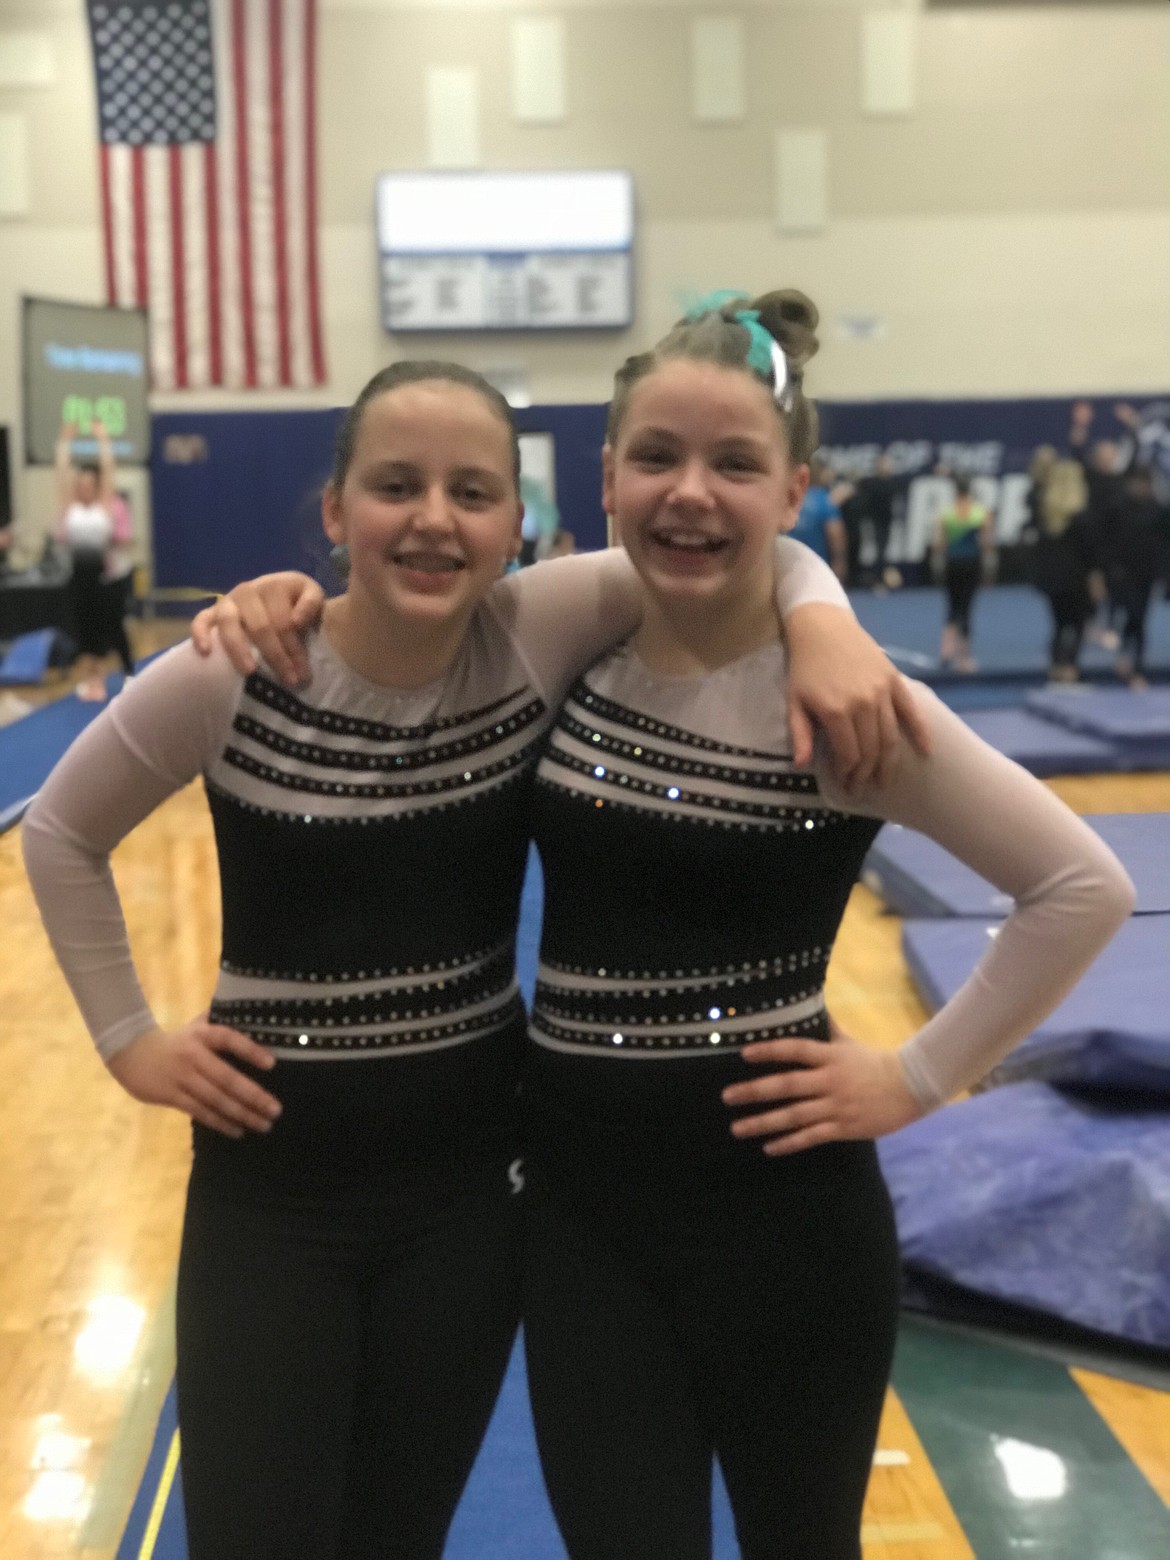 Courtesy photo
Avant Coeur Xcel gold gymnasts competing at the recent state championships in Boise included Bethany Rohrenbach, left, and Sarah Hudson.